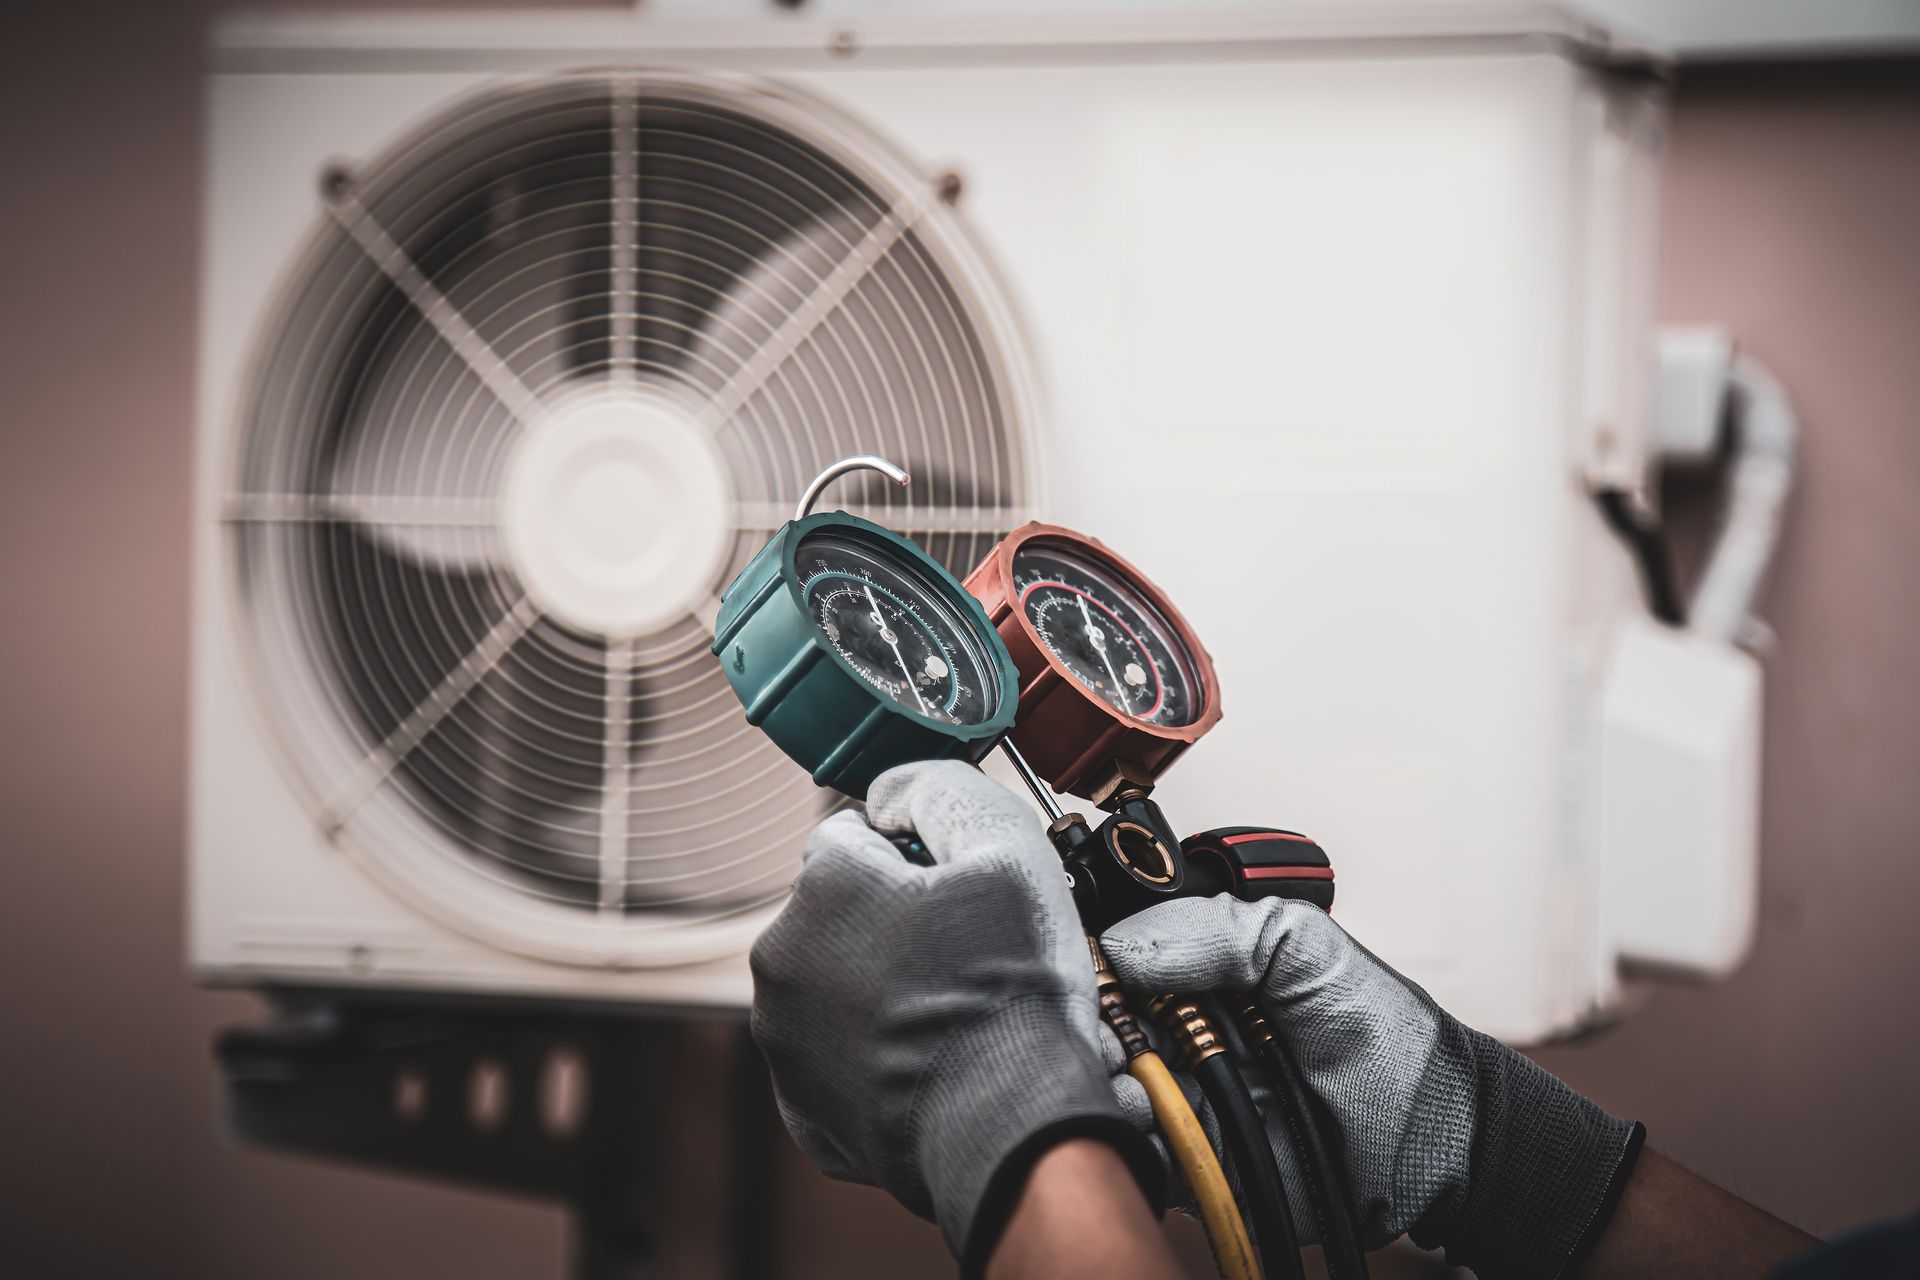 A person is holding a gauge in front of an air conditioner.